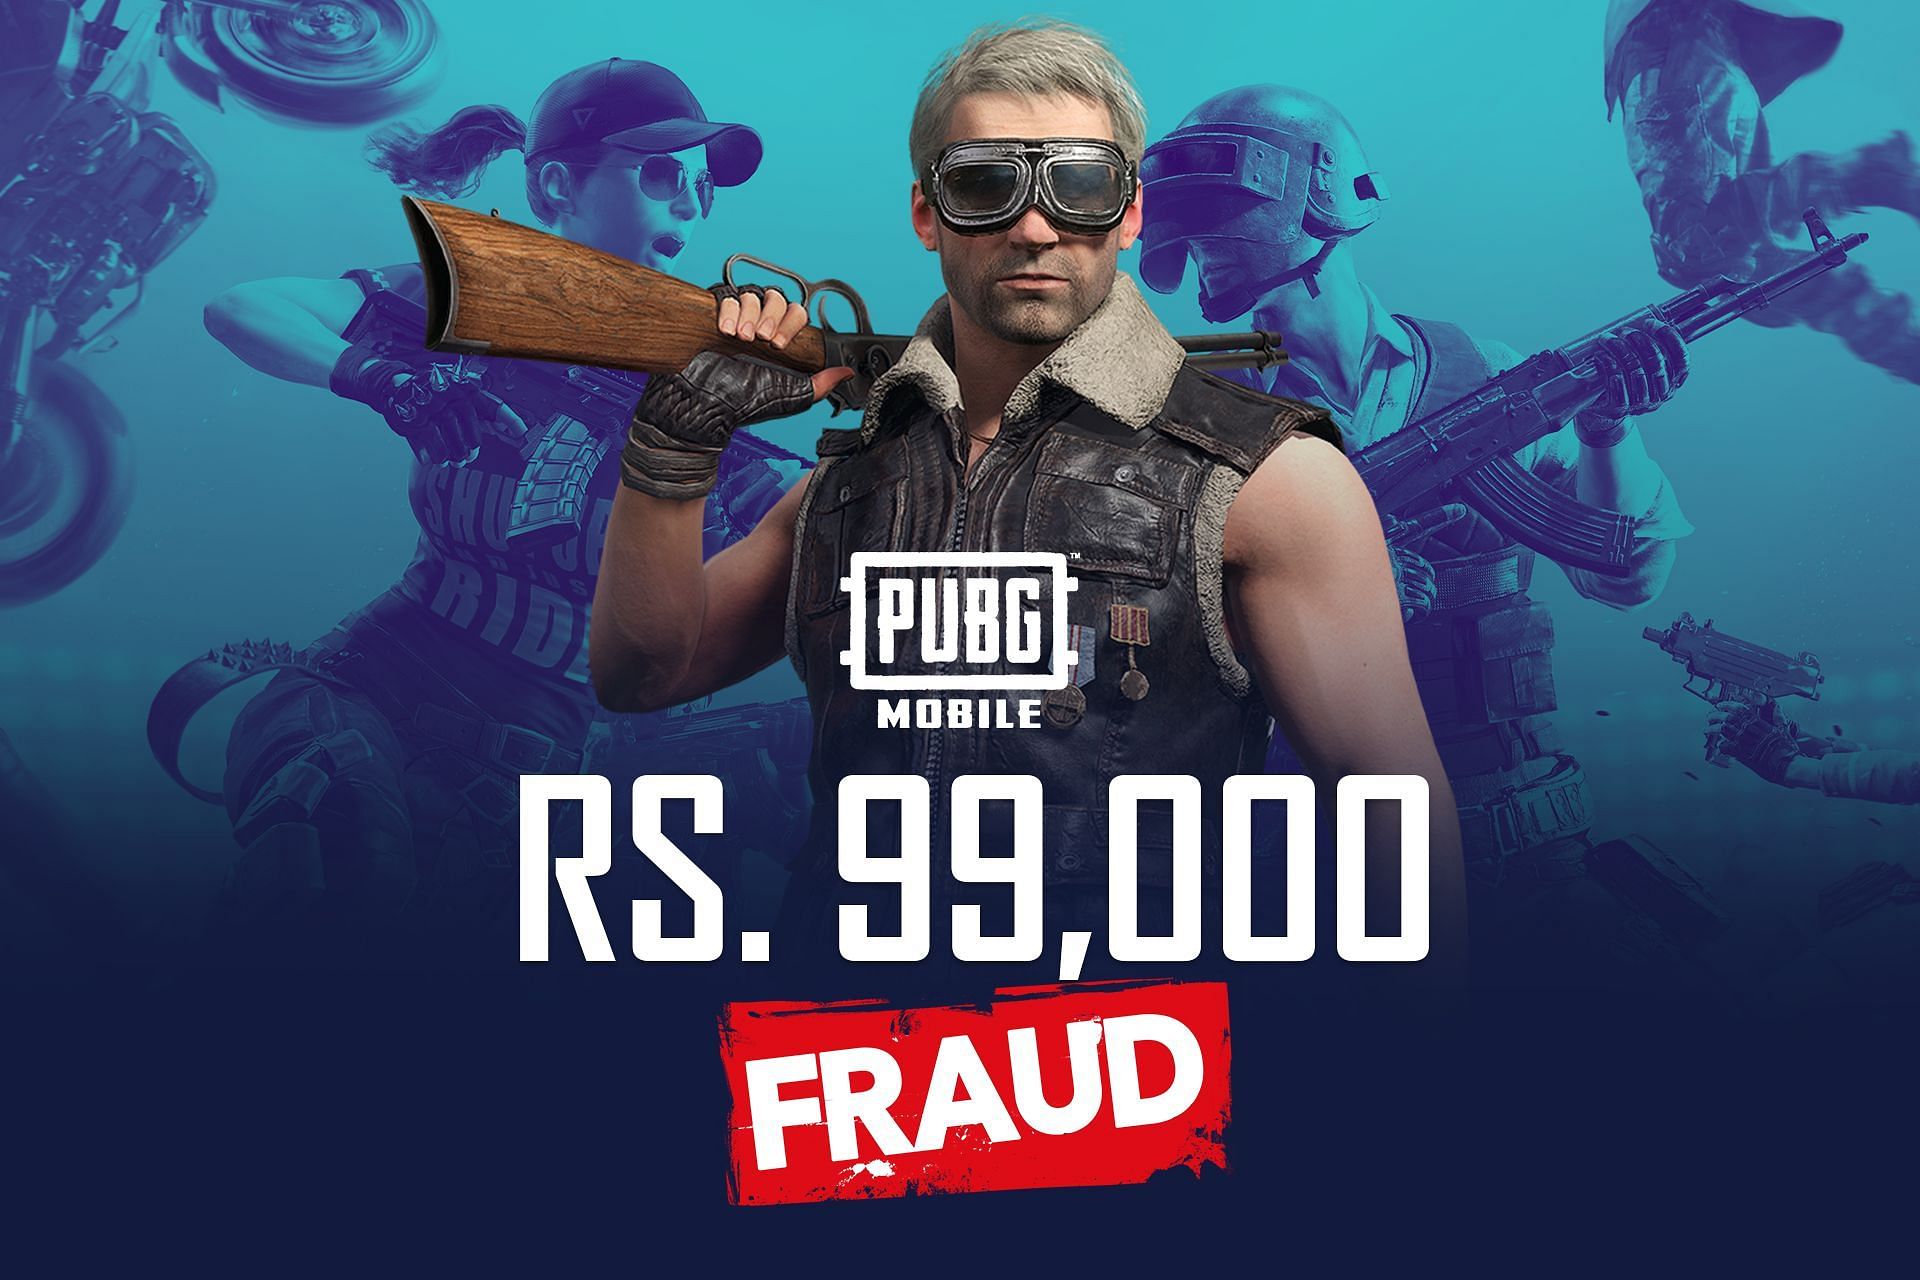 In a recent case of PUBG addiction, a youth from Madhya Pradesh was defrauded of INR 99 thousand (Image via Sportskeeda)